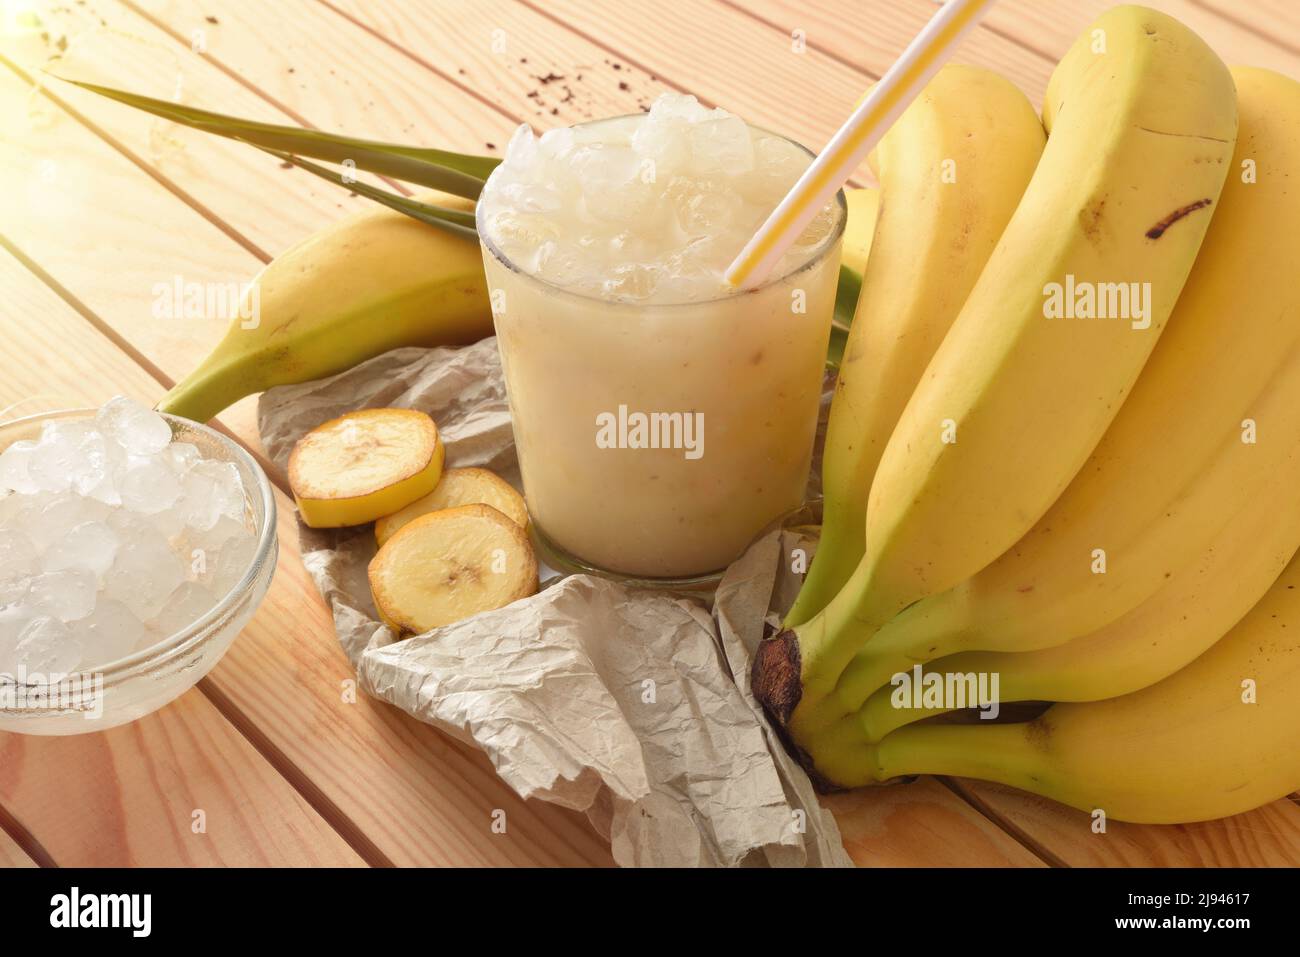 Glass of cold banana drink with ice on wooden table with fruit. Elevated view. Horizontal composition. Stock Photo